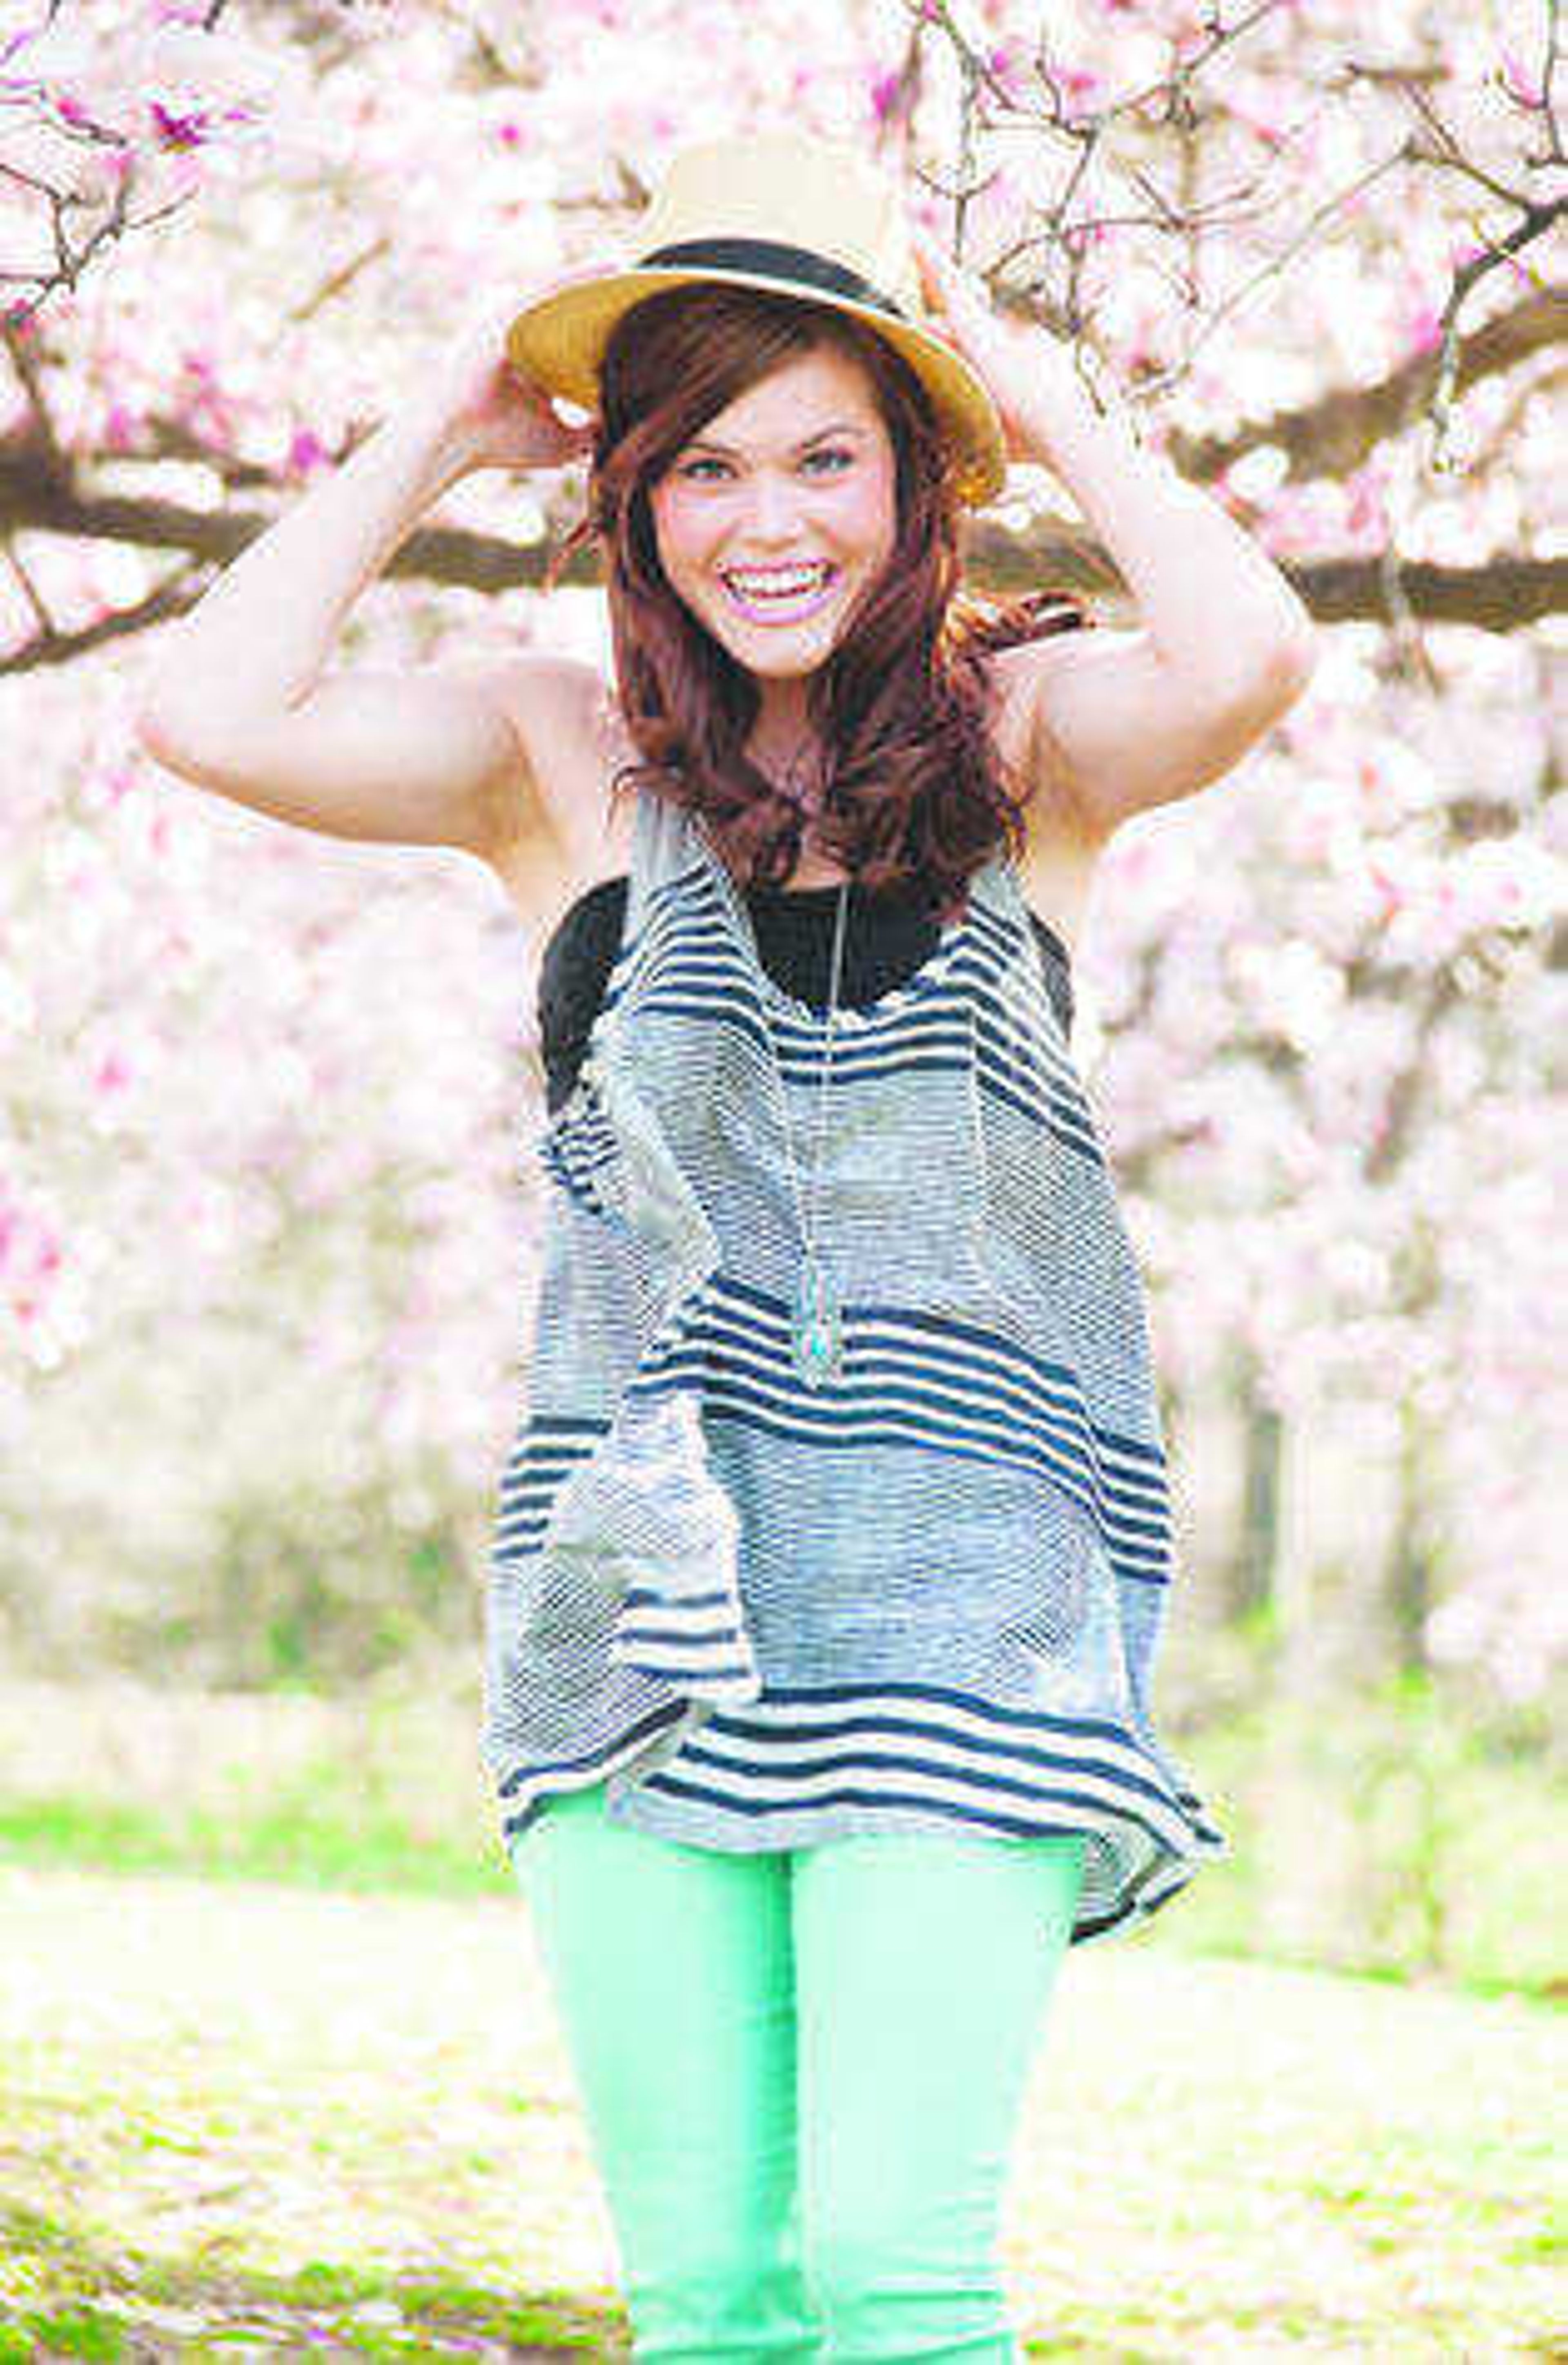 Straw hat, mint jeans and striped tank from Stash. Photo by Alyssa Brewer